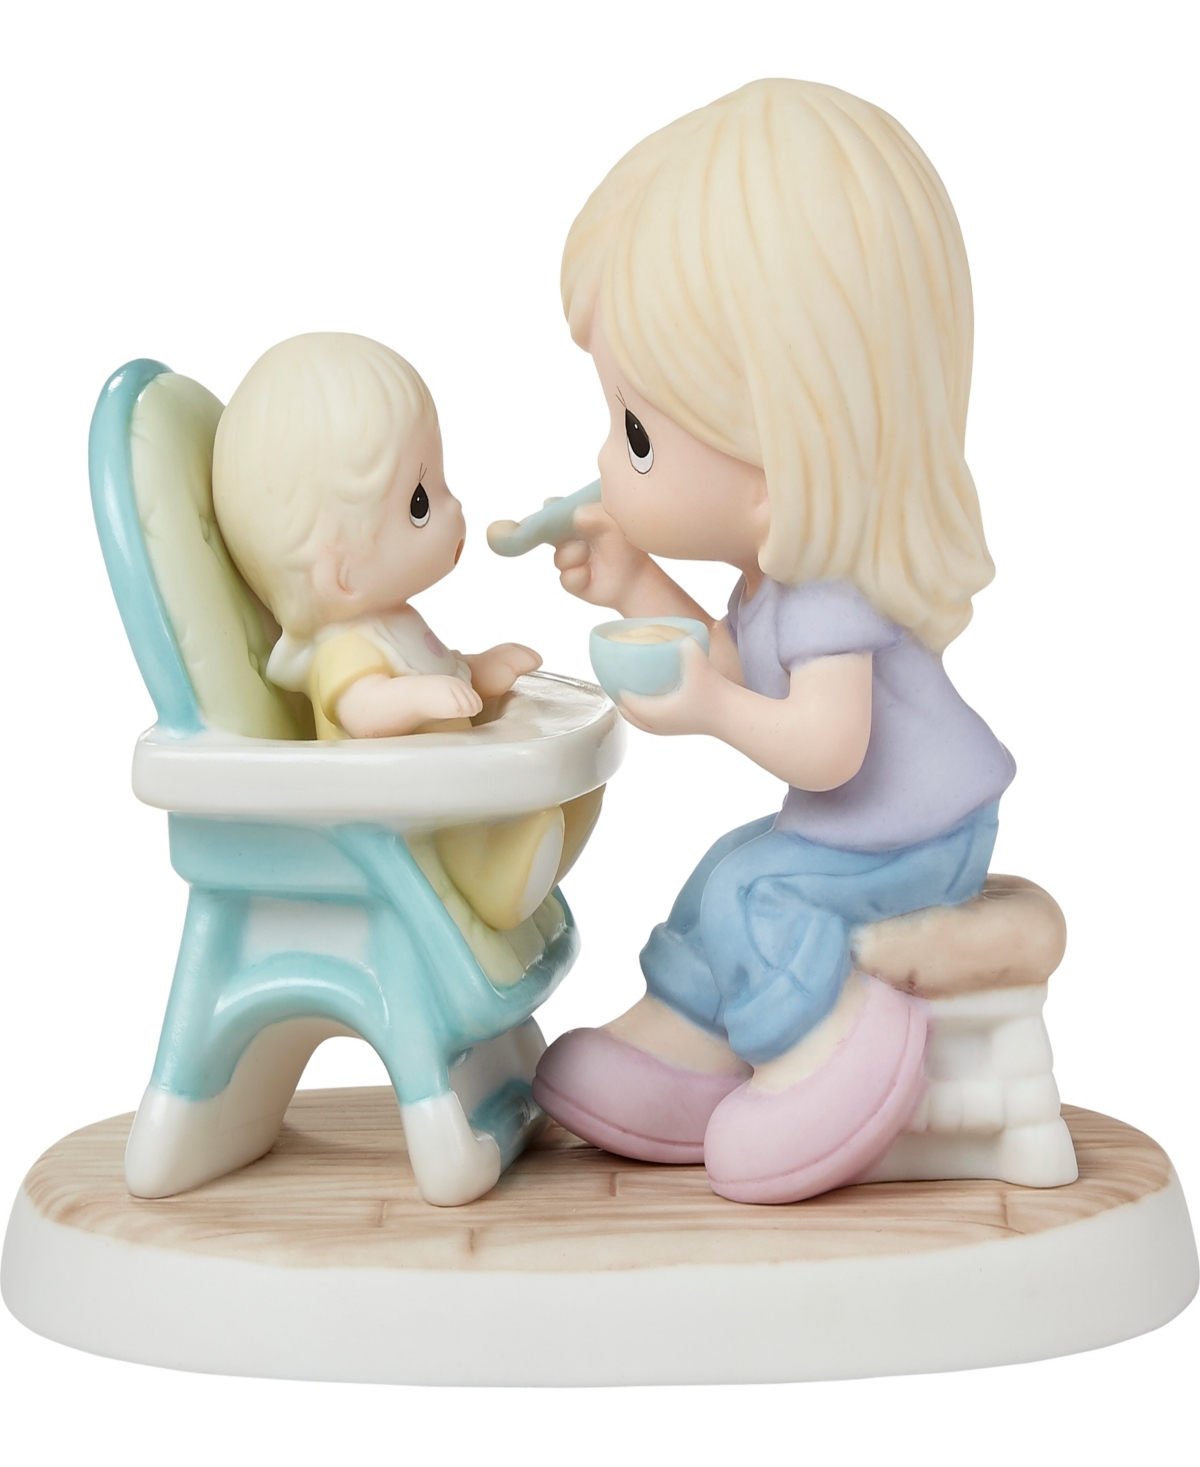 Precious Moments 222017 Love At First Bite Porcelain Figurine In Multicolored